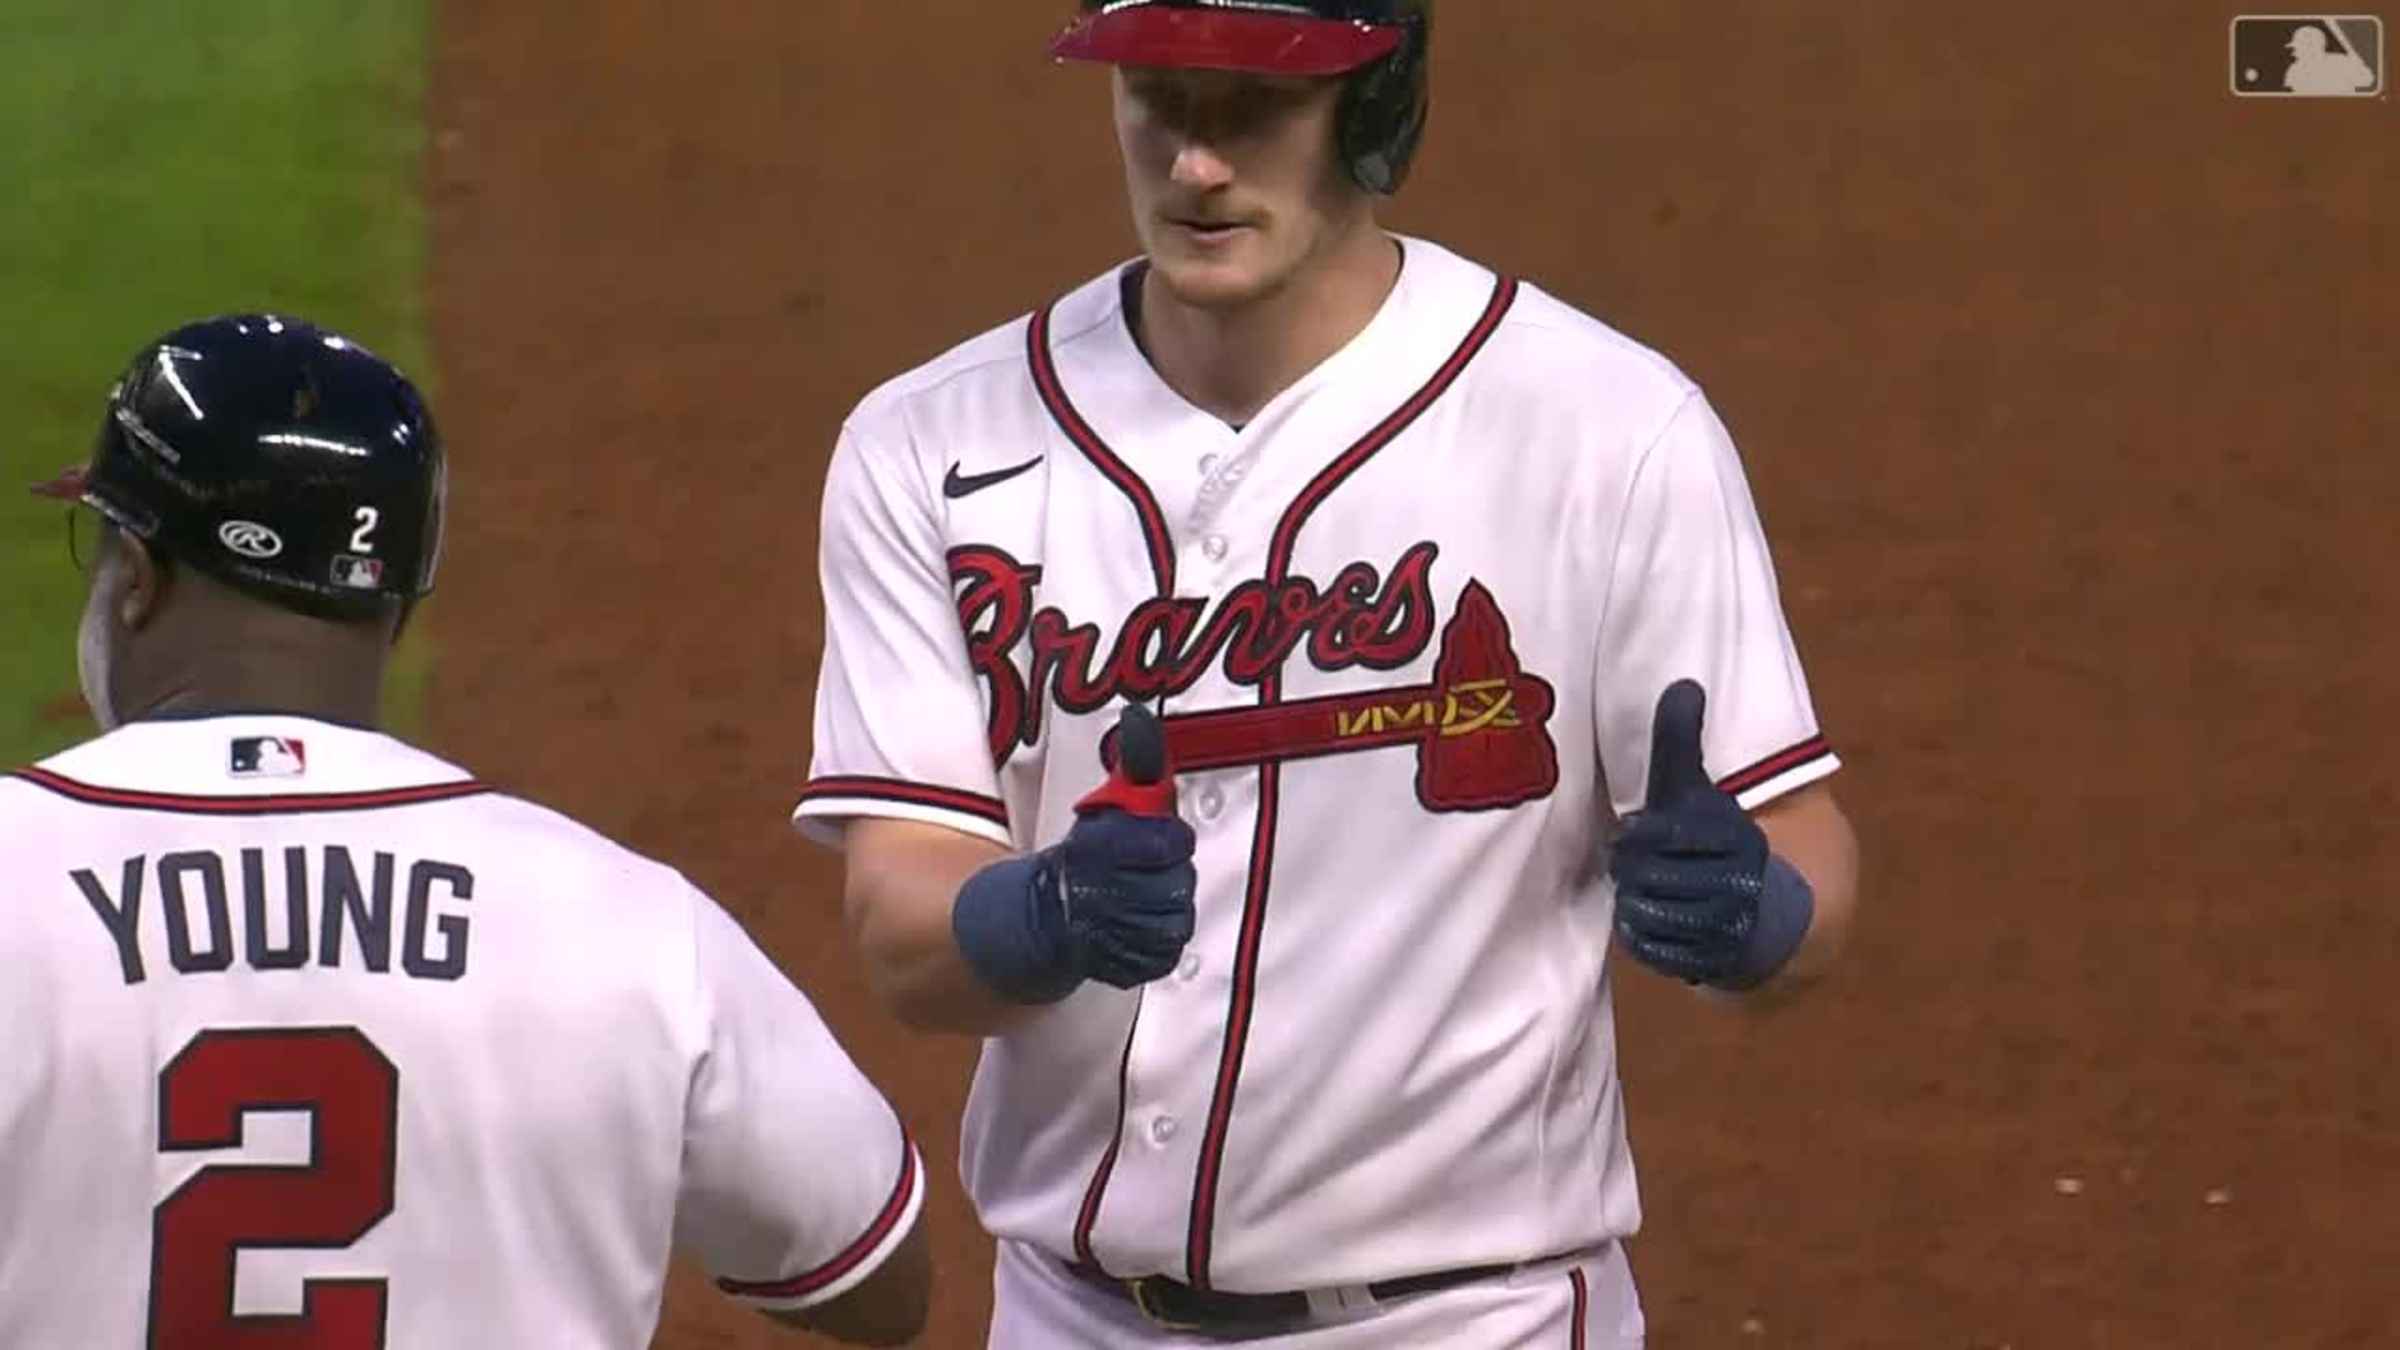 Morton on the mound, plus HR power helps Braves beat Red Sox 9-3